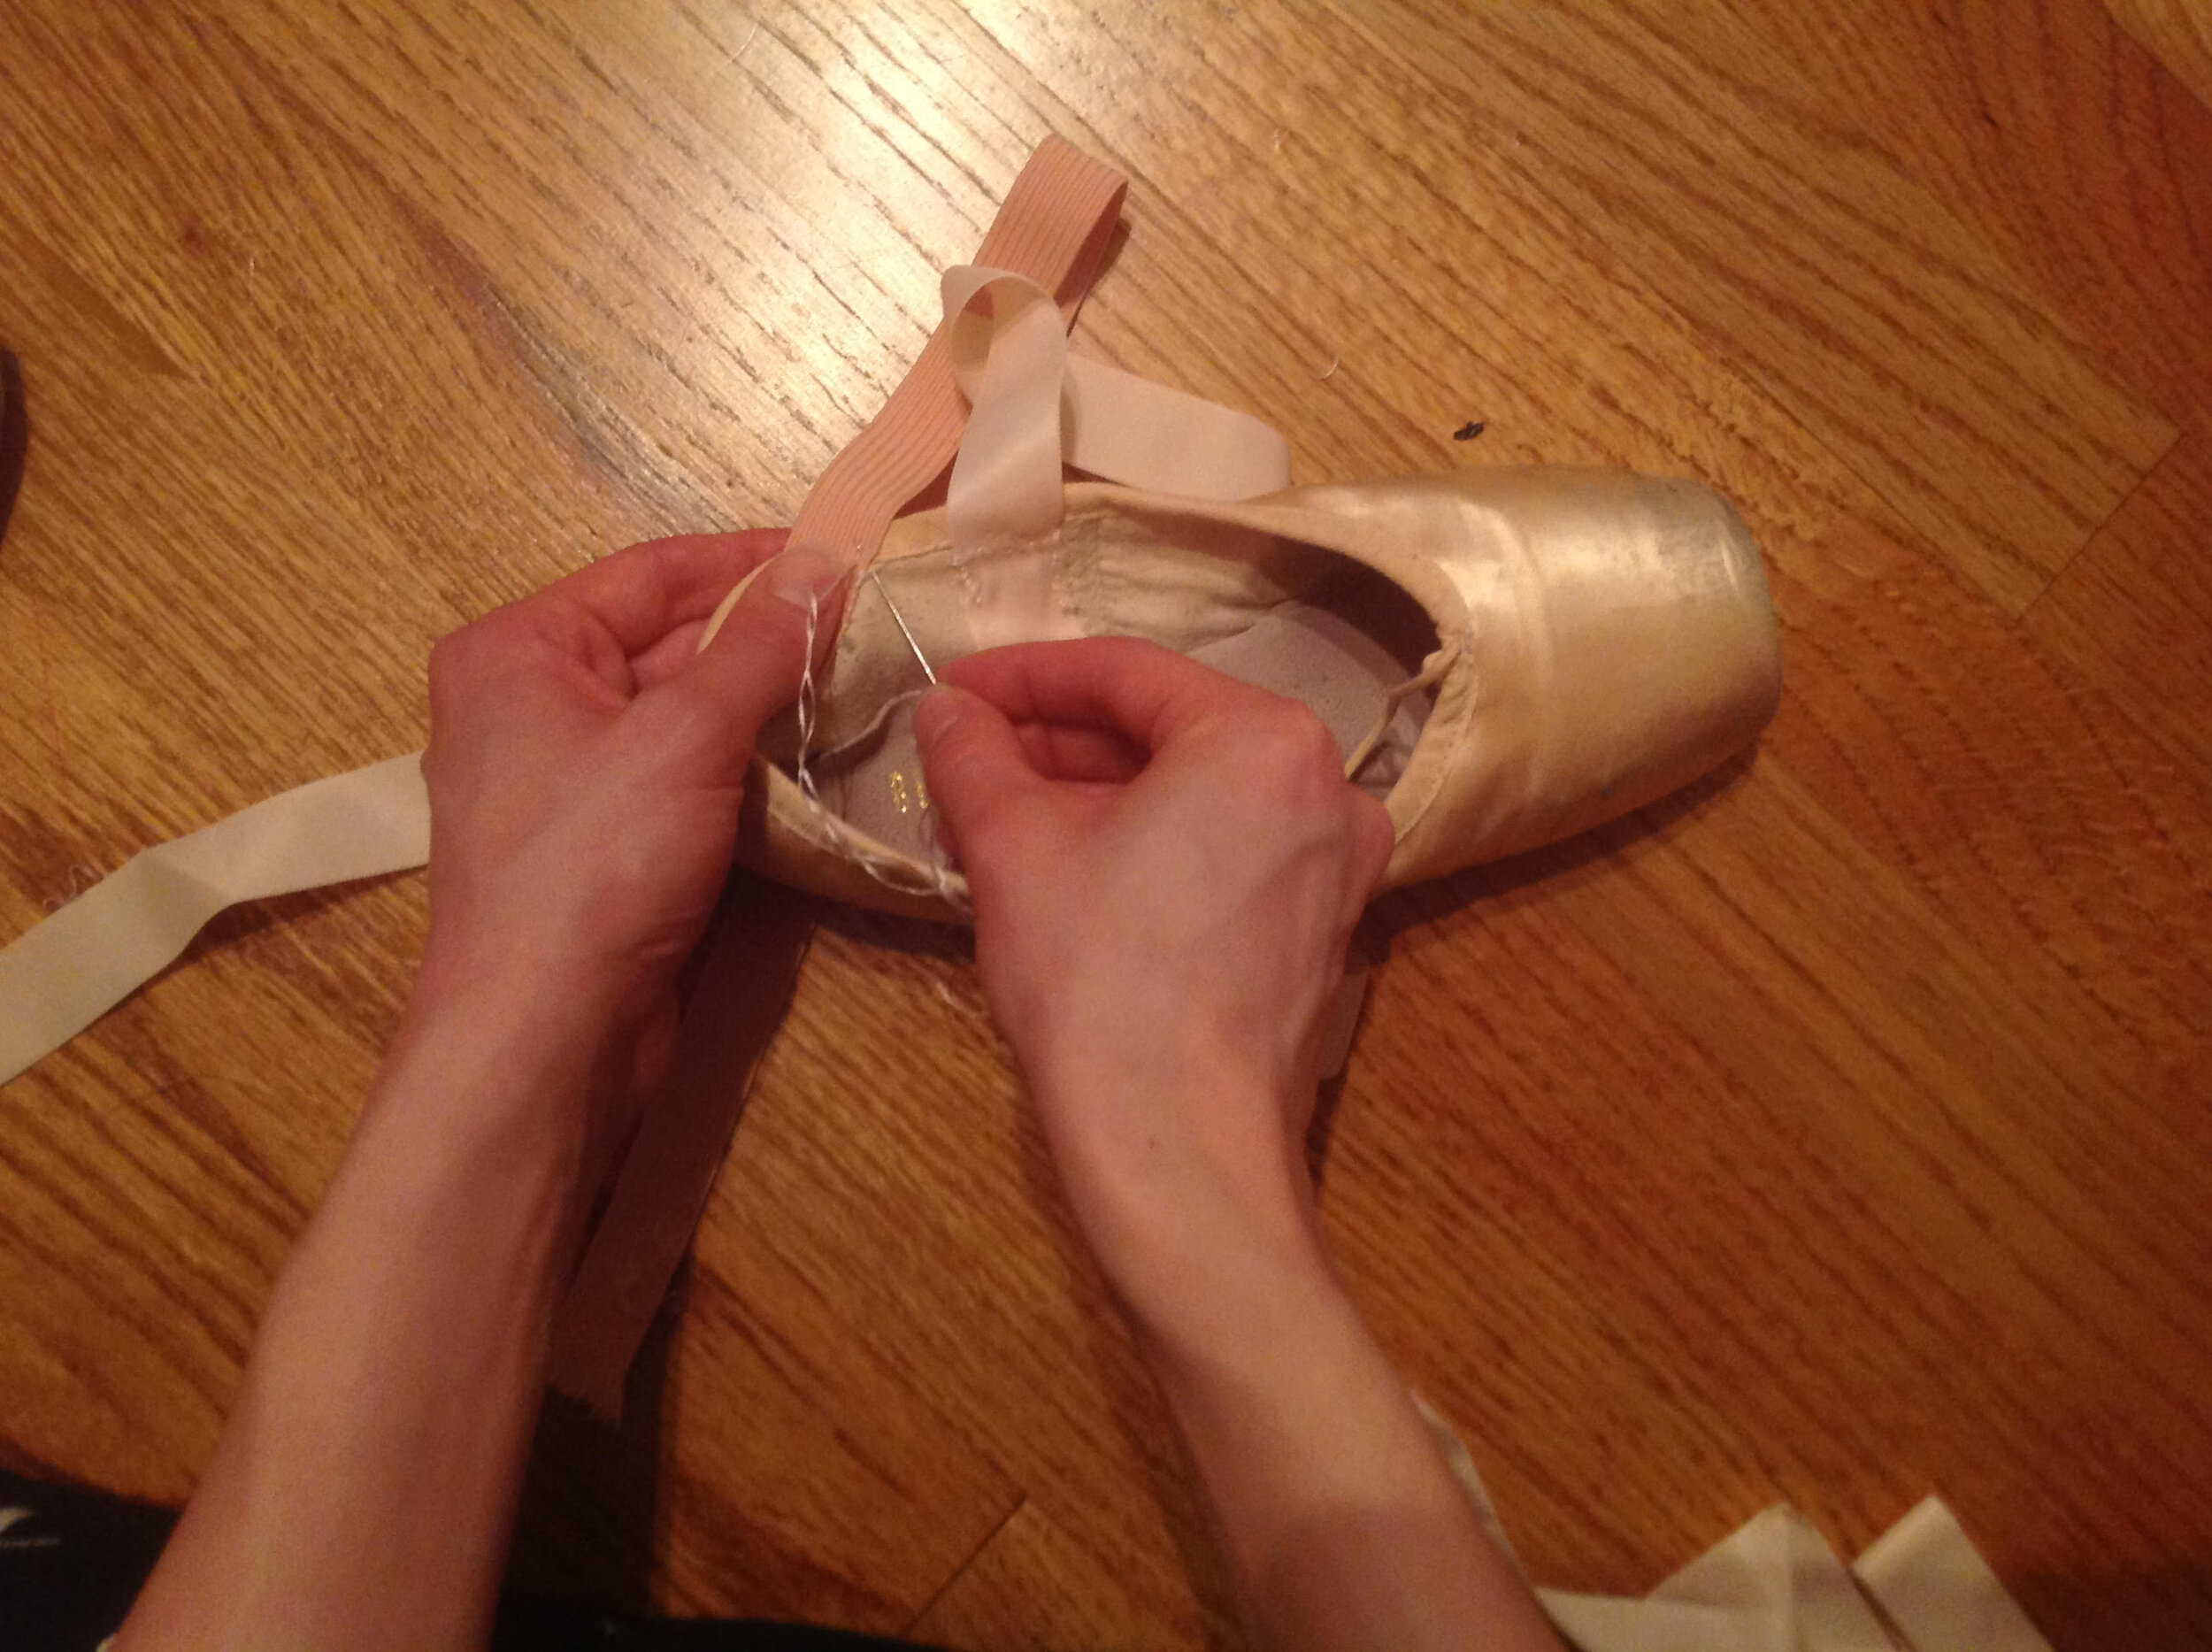 I Need to Sew My Own Ribbons?? — School of Ballet 5:8